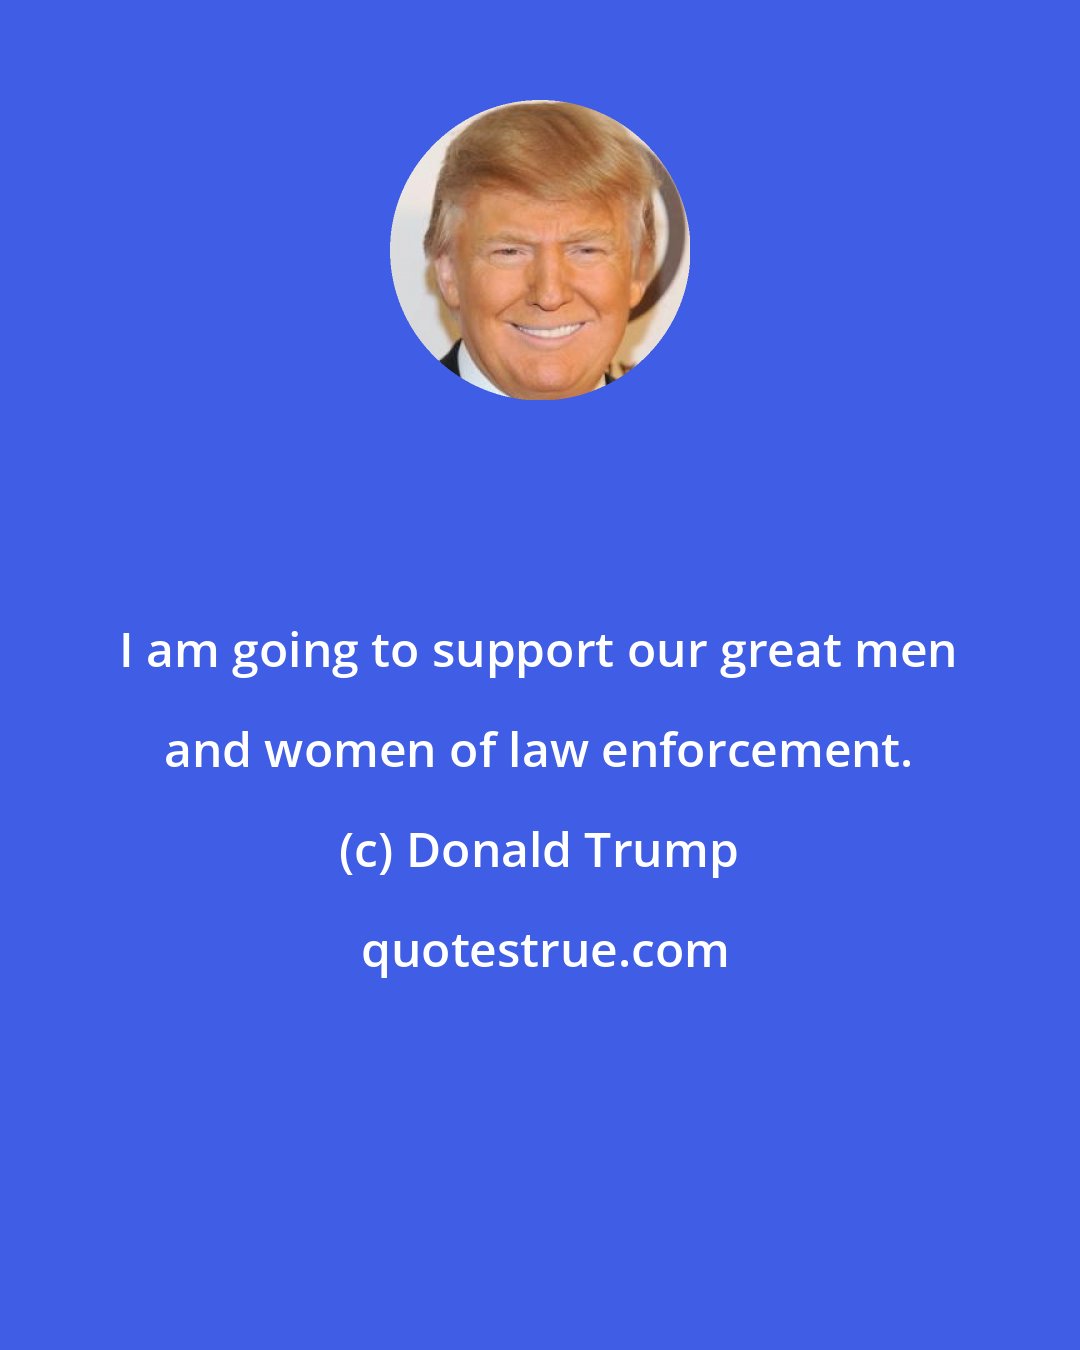 Donald Trump: I am going to support our great men and women of law enforcement.